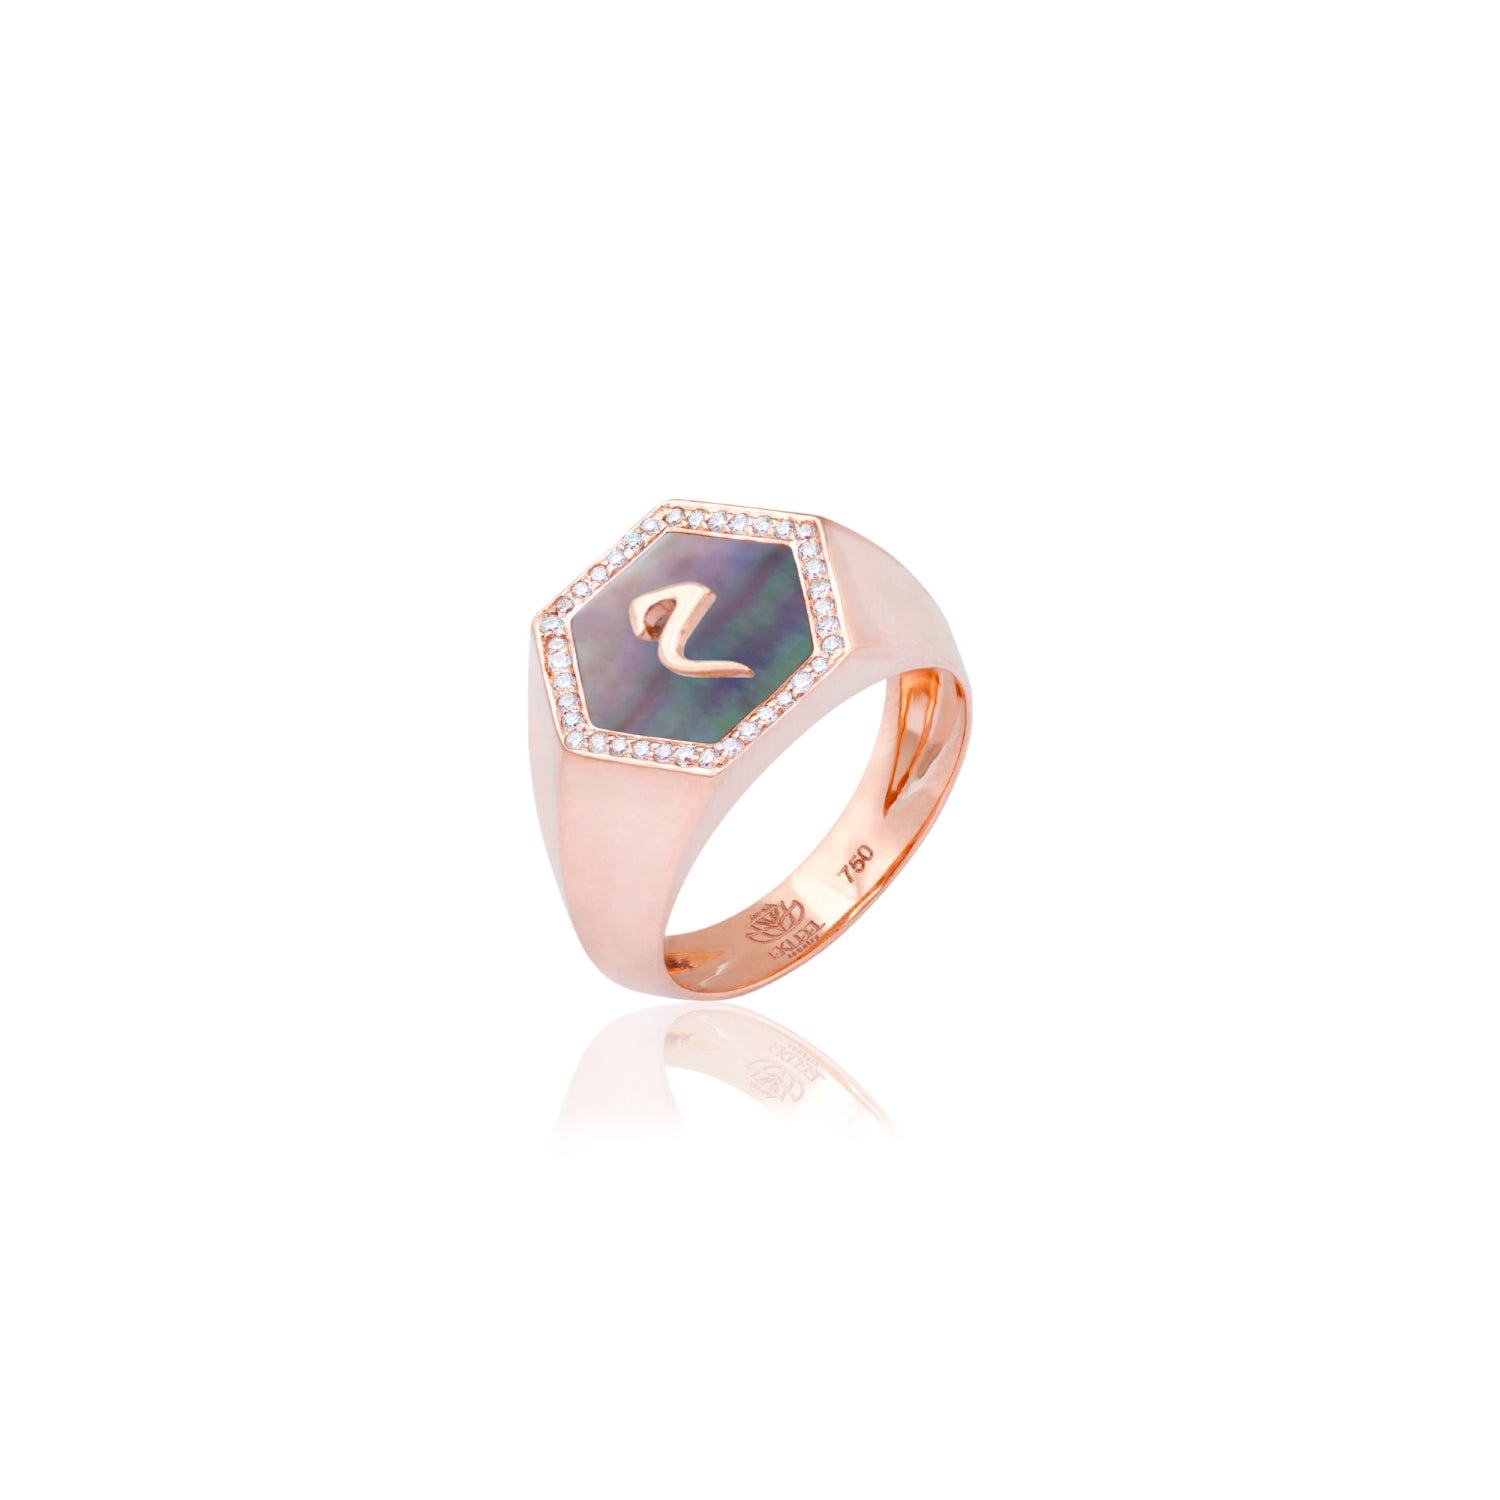 Qamoos 2.0 Letter م Black Mother of Pearl and Diamond Signet Ring in Rose Gold